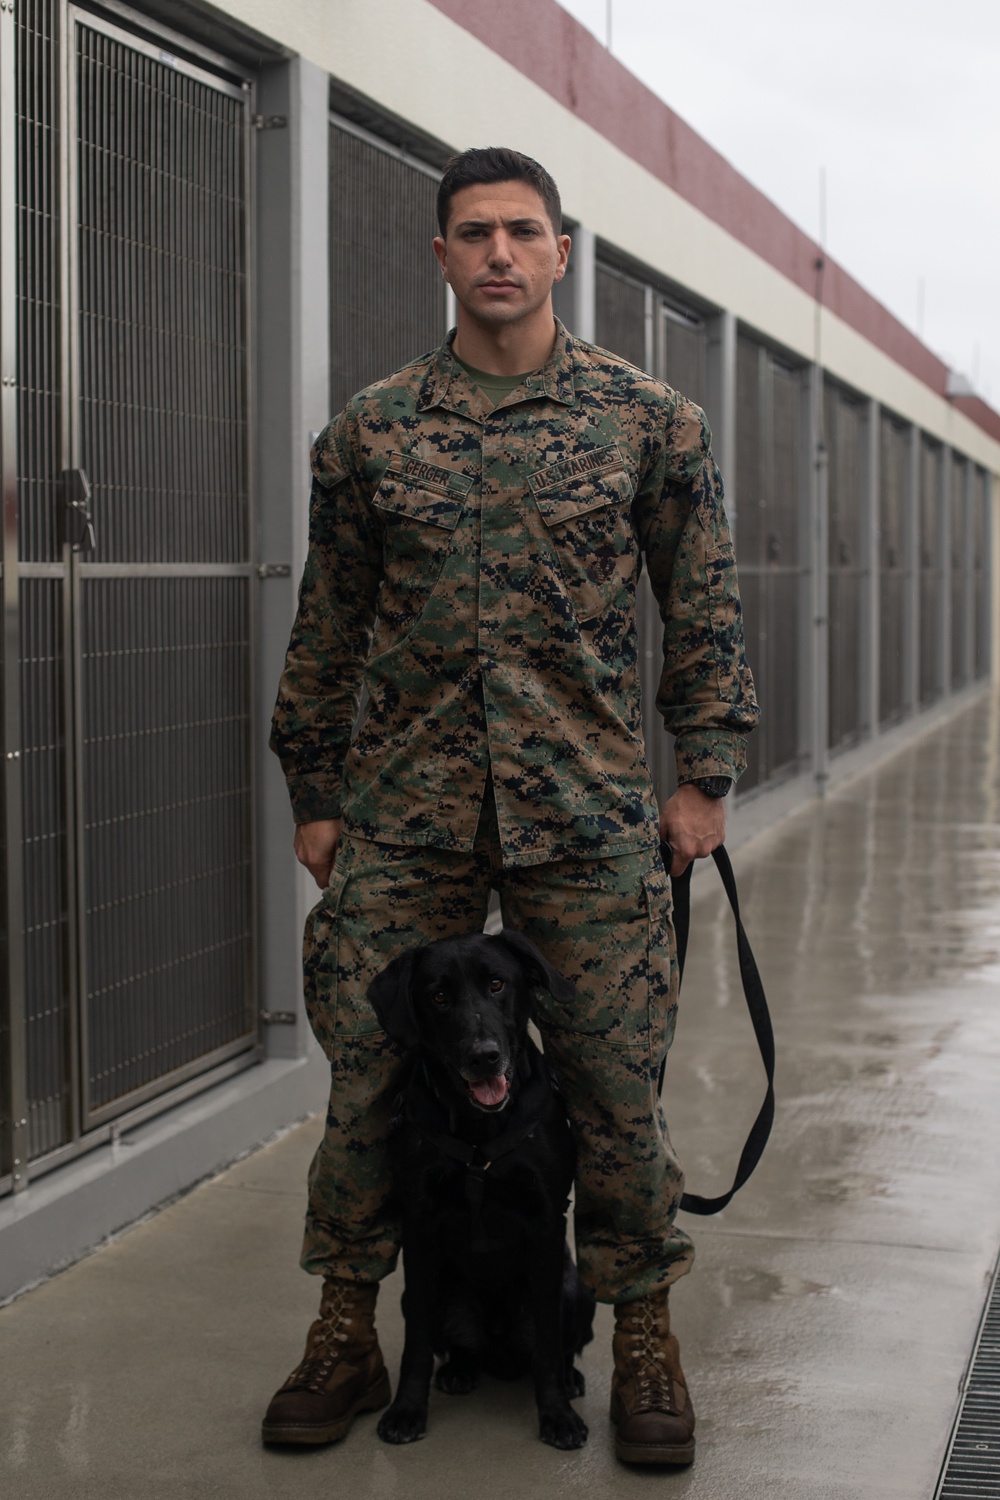 Meet our MEF | Working dog handler explains his role in III MEF